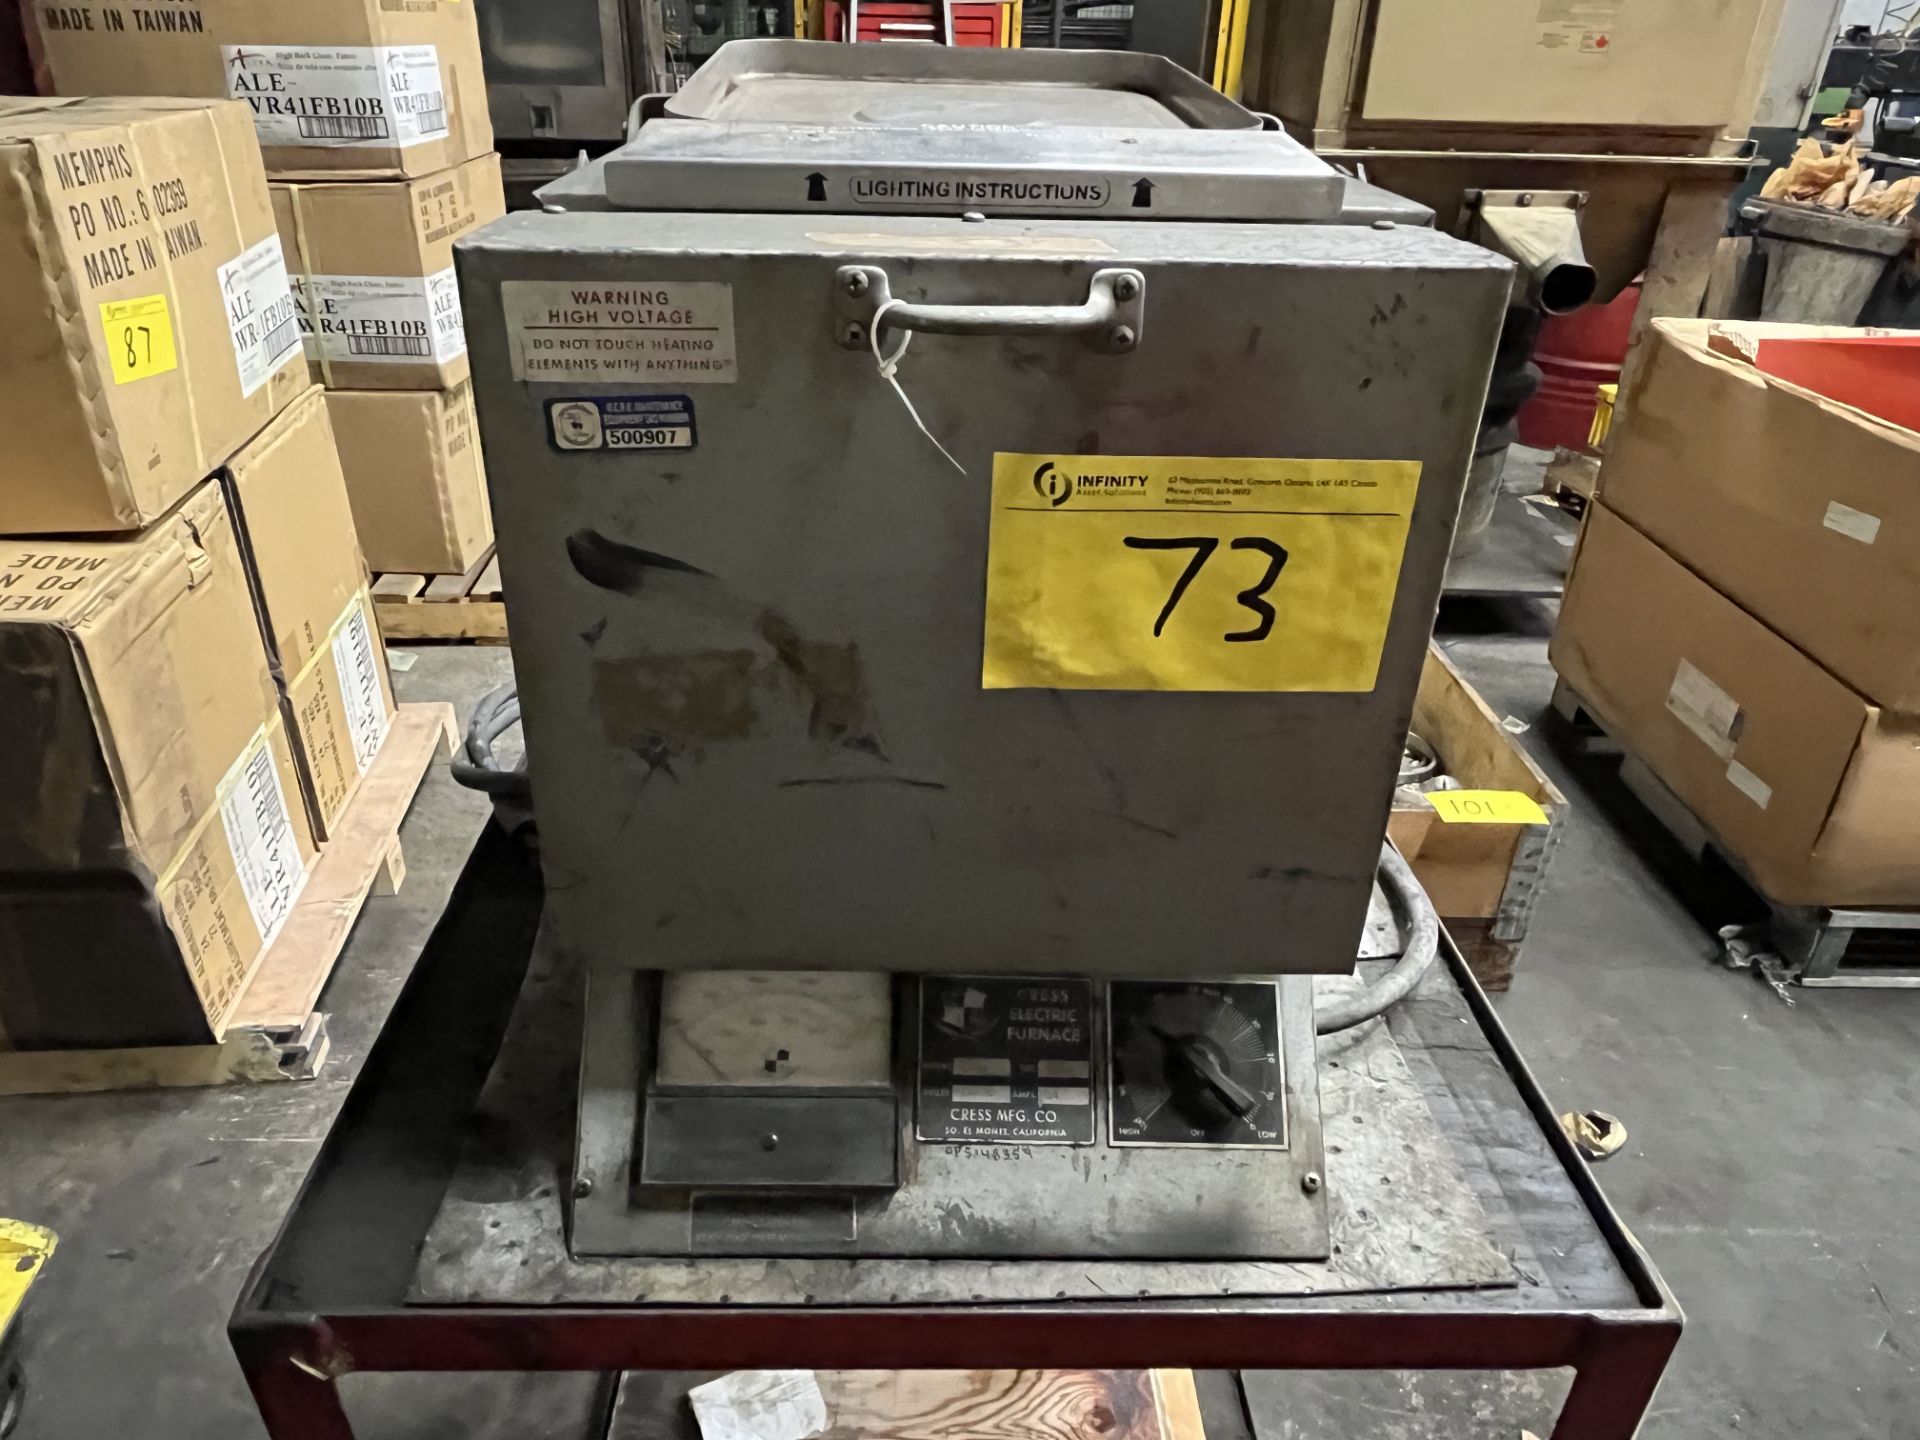 CRESS MFG. CO. ELECTRIC FURNACE MODEL C-104, S/N 7502 - Image 2 of 5